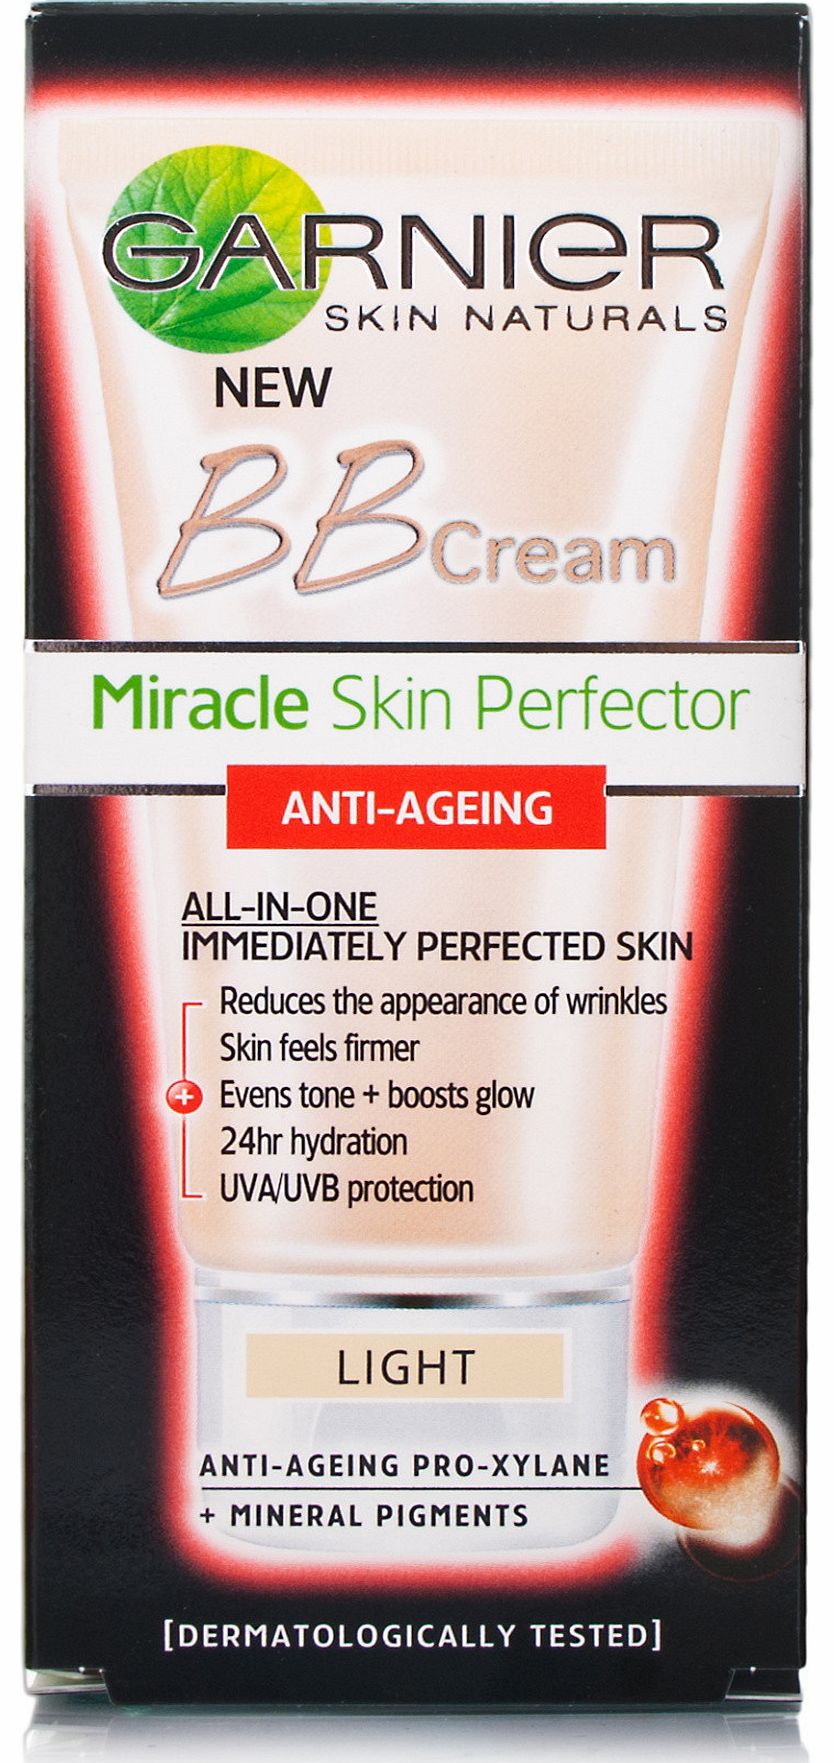 All in One Anti-Ageing BB Balm Light